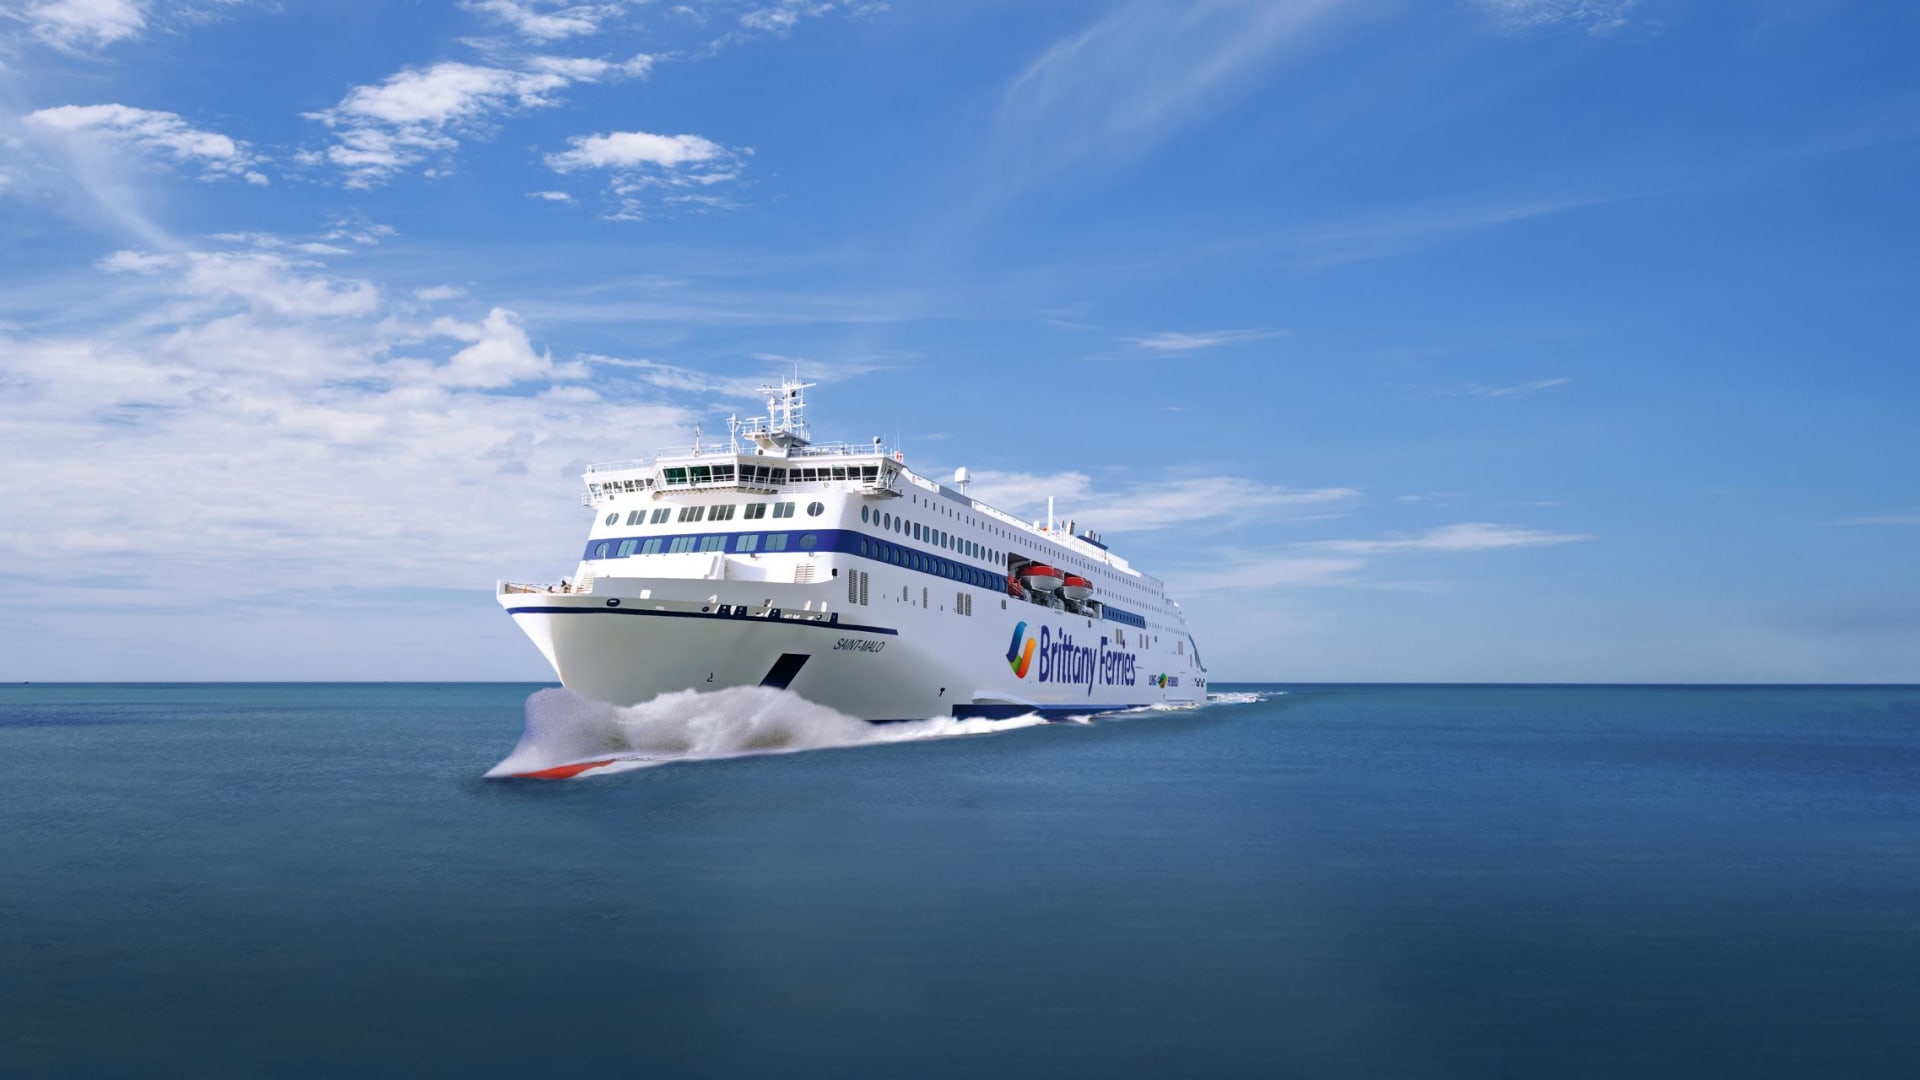 World's largest hybrid ship set to ferry passengers between Britain and France